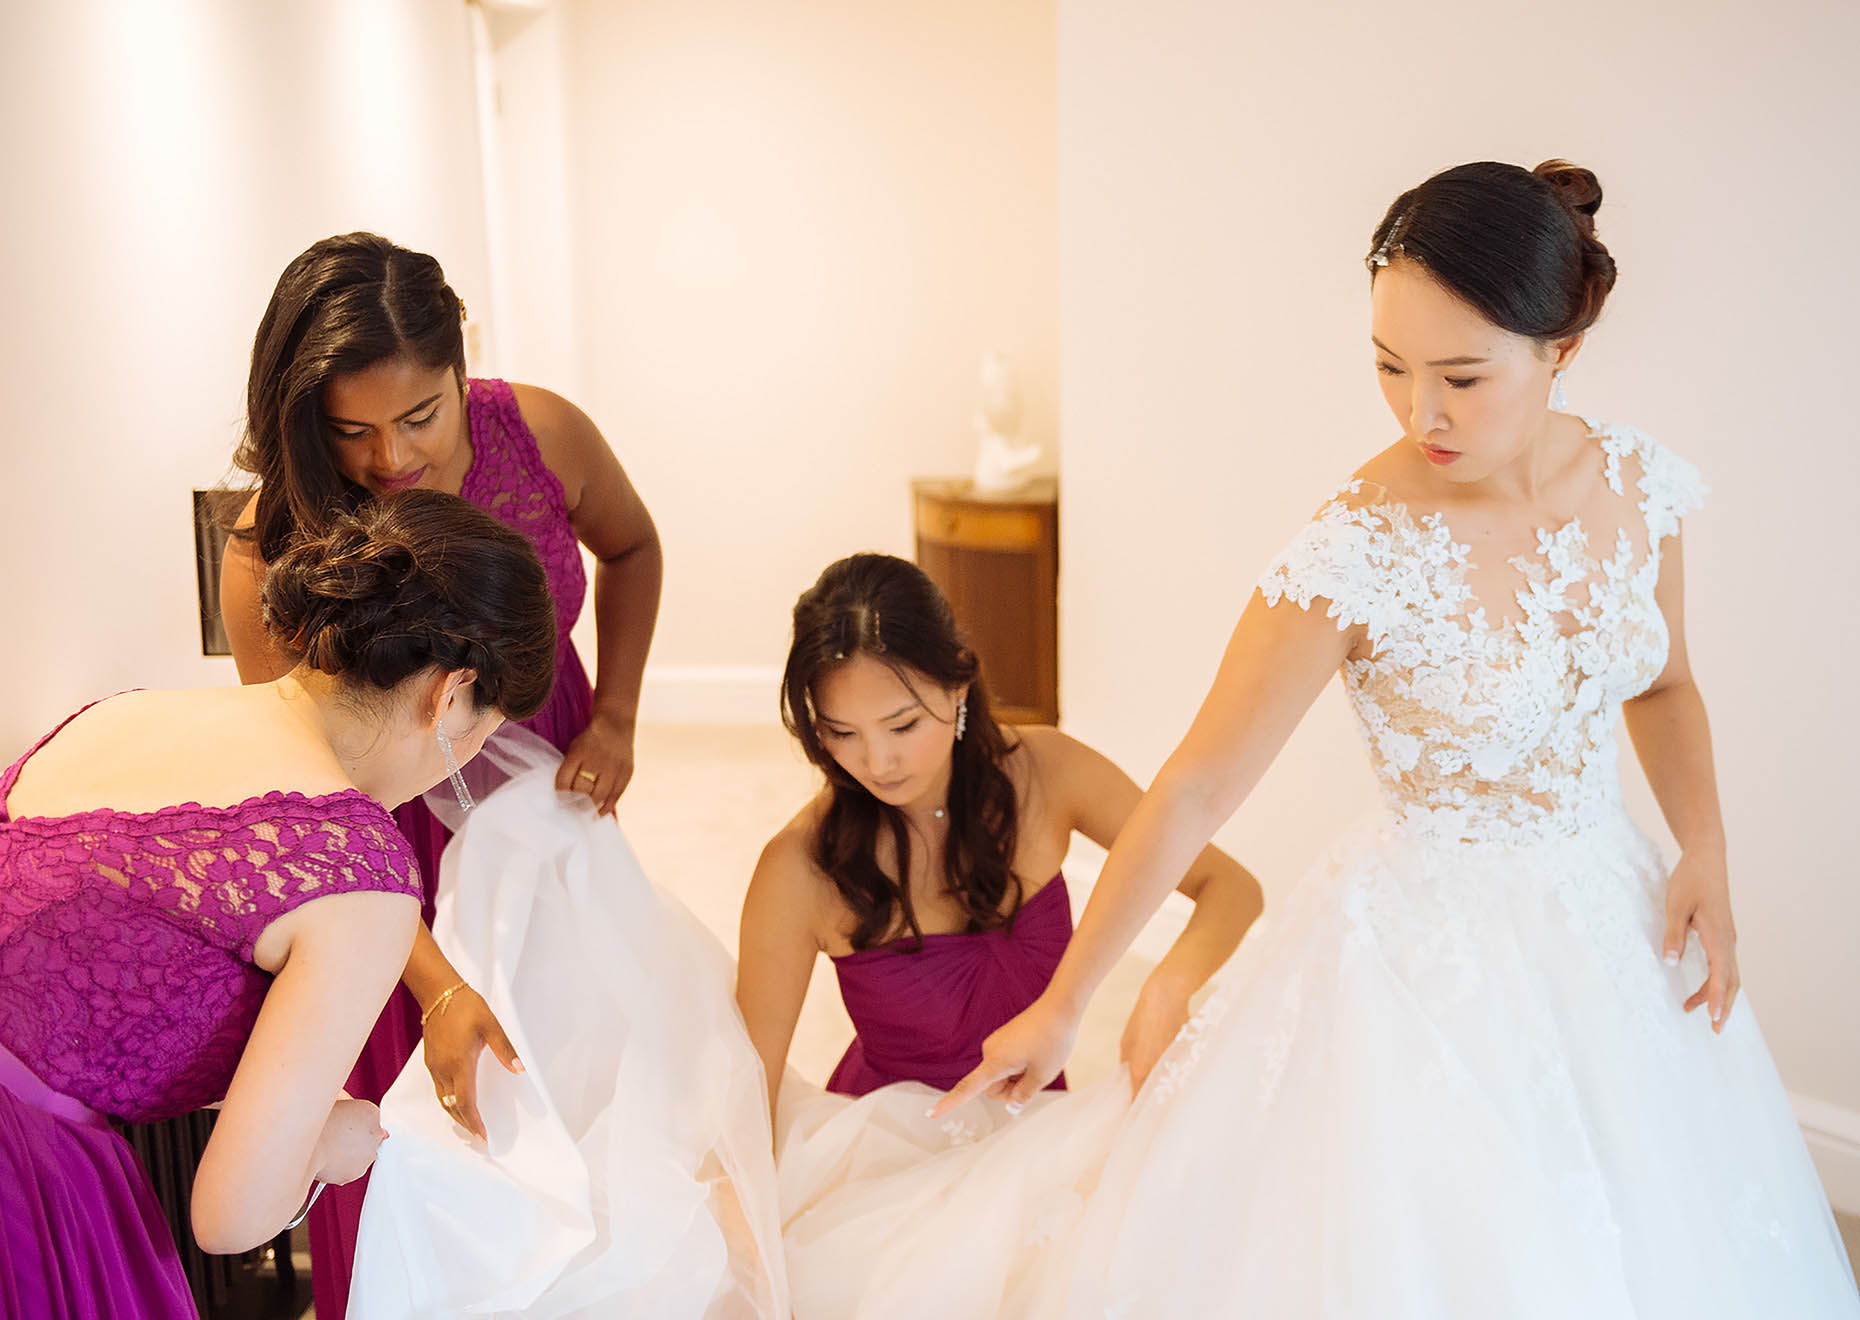 chay-felix-bridesmaids-dress-leicestershire-wedding-photography-03